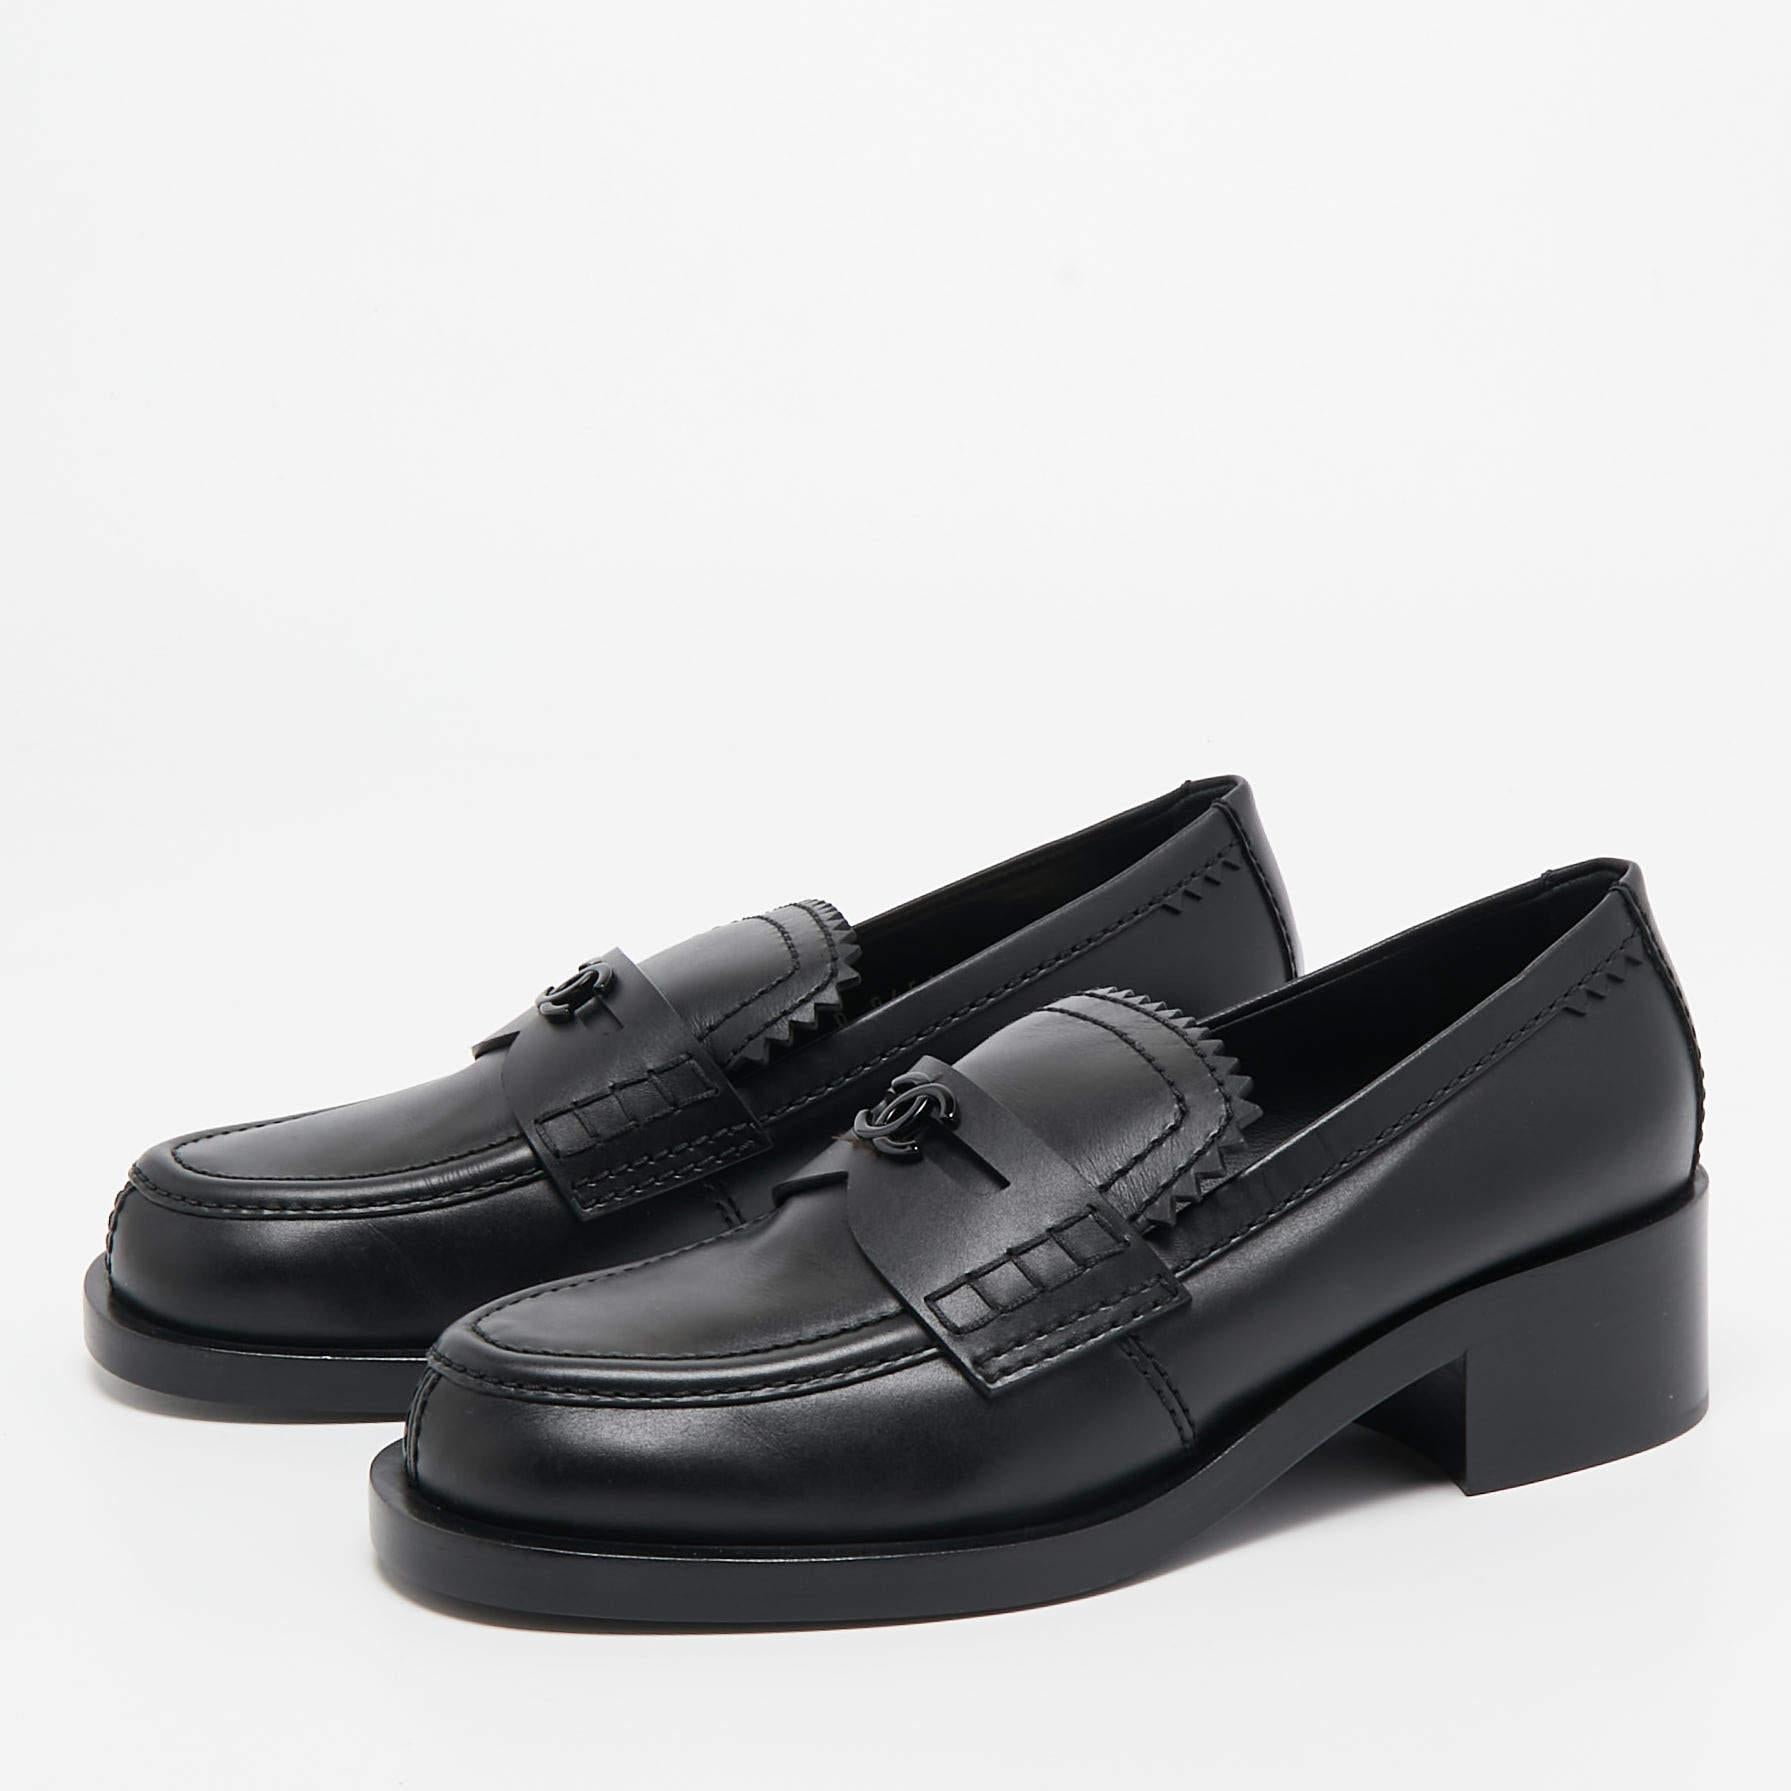 Practical, fashionable, and durable—these designer loafers are carefully built to be fine companions to your everyday style. They come made using the best materials to be a prized buy.

Includes: Original Dustbag, Original Box, Invoice, shopping bag